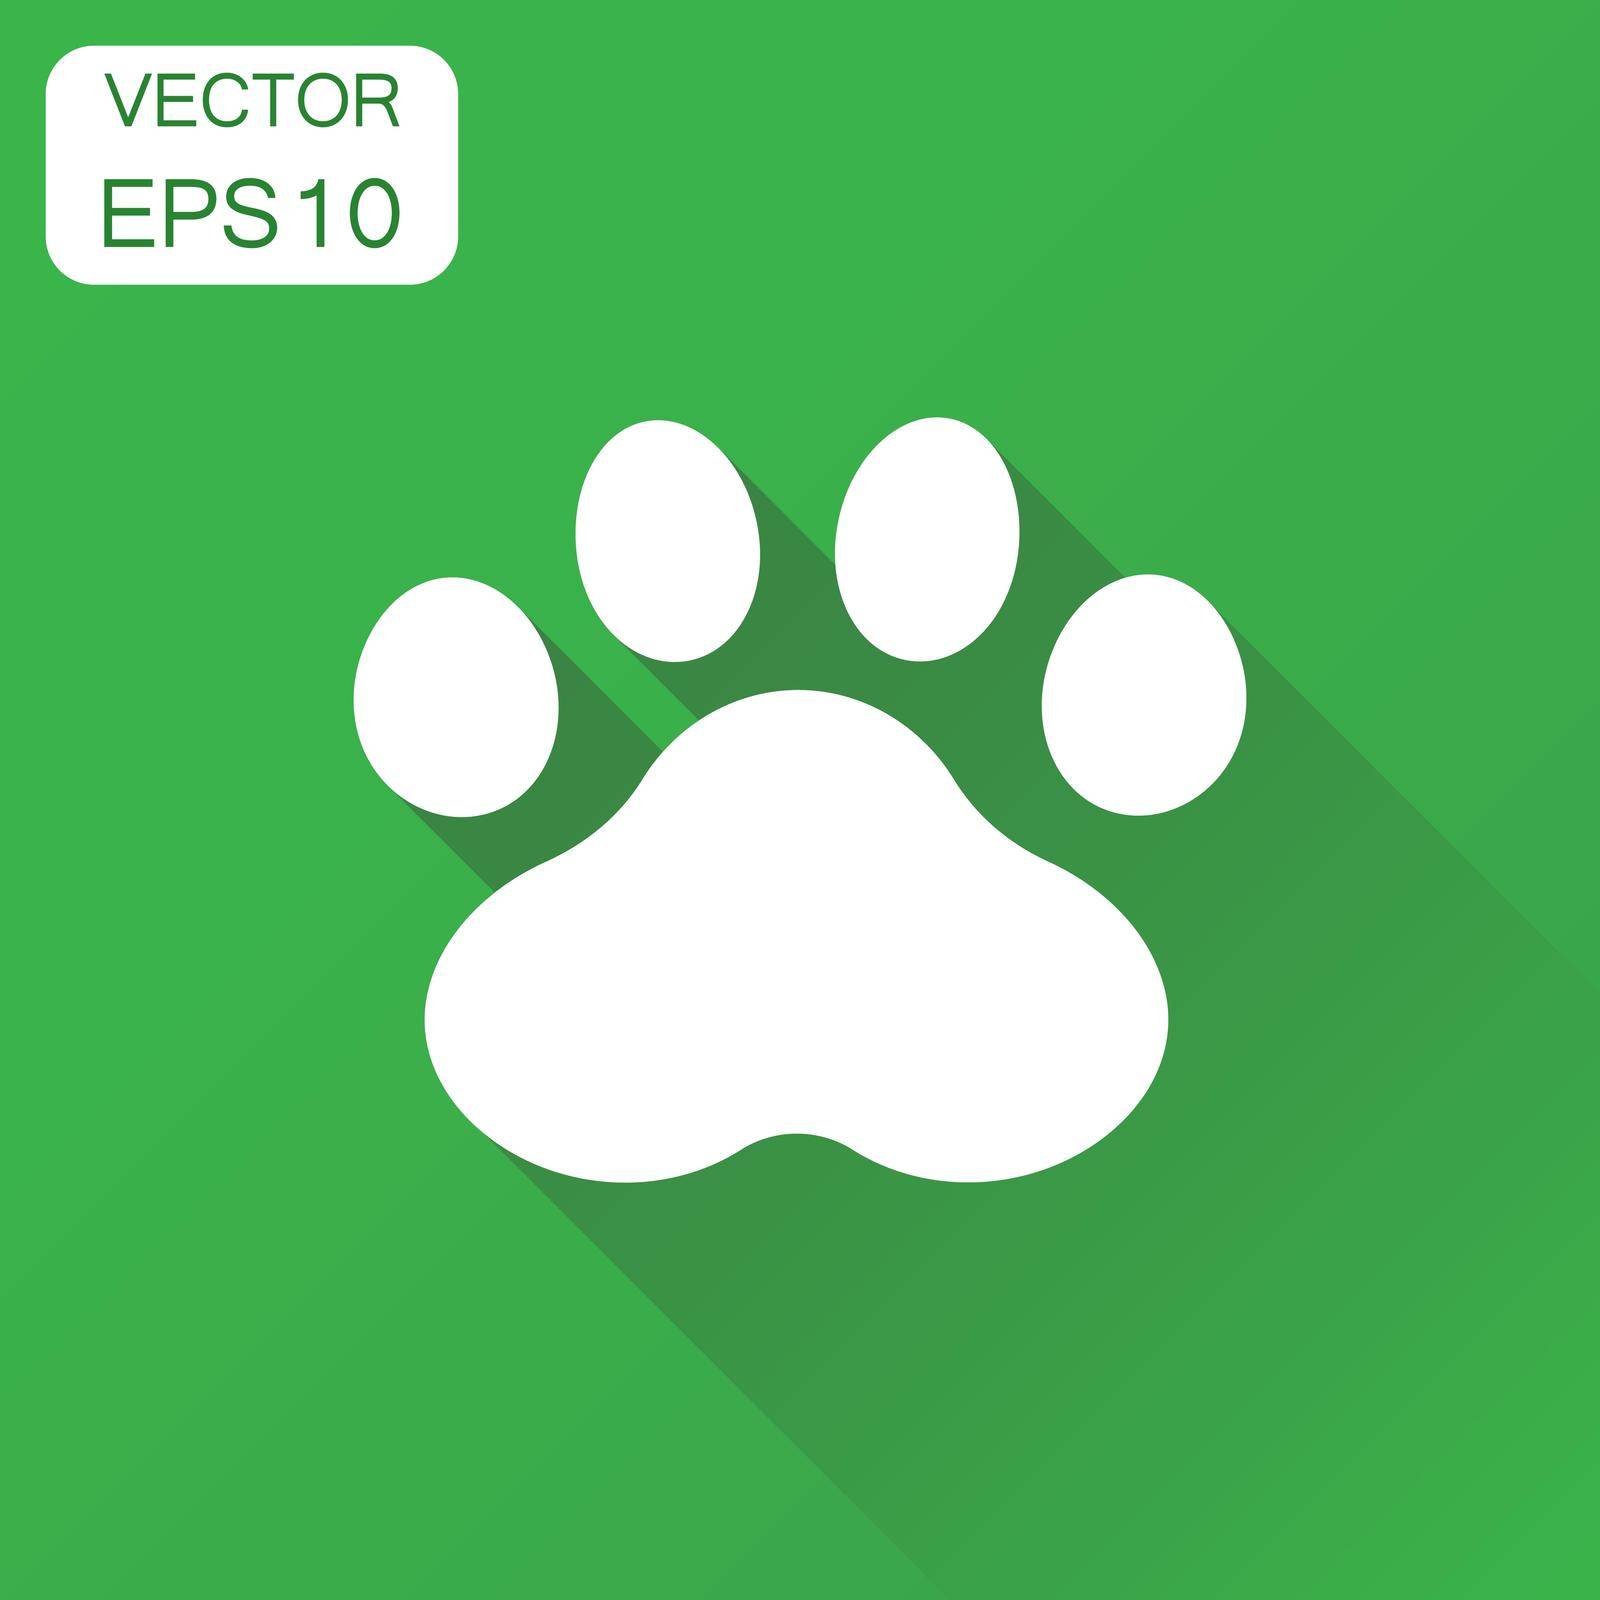 Paw print icon. Business concept dog or cat pawprint pictogram. Vector illustration on green background with long shadow.